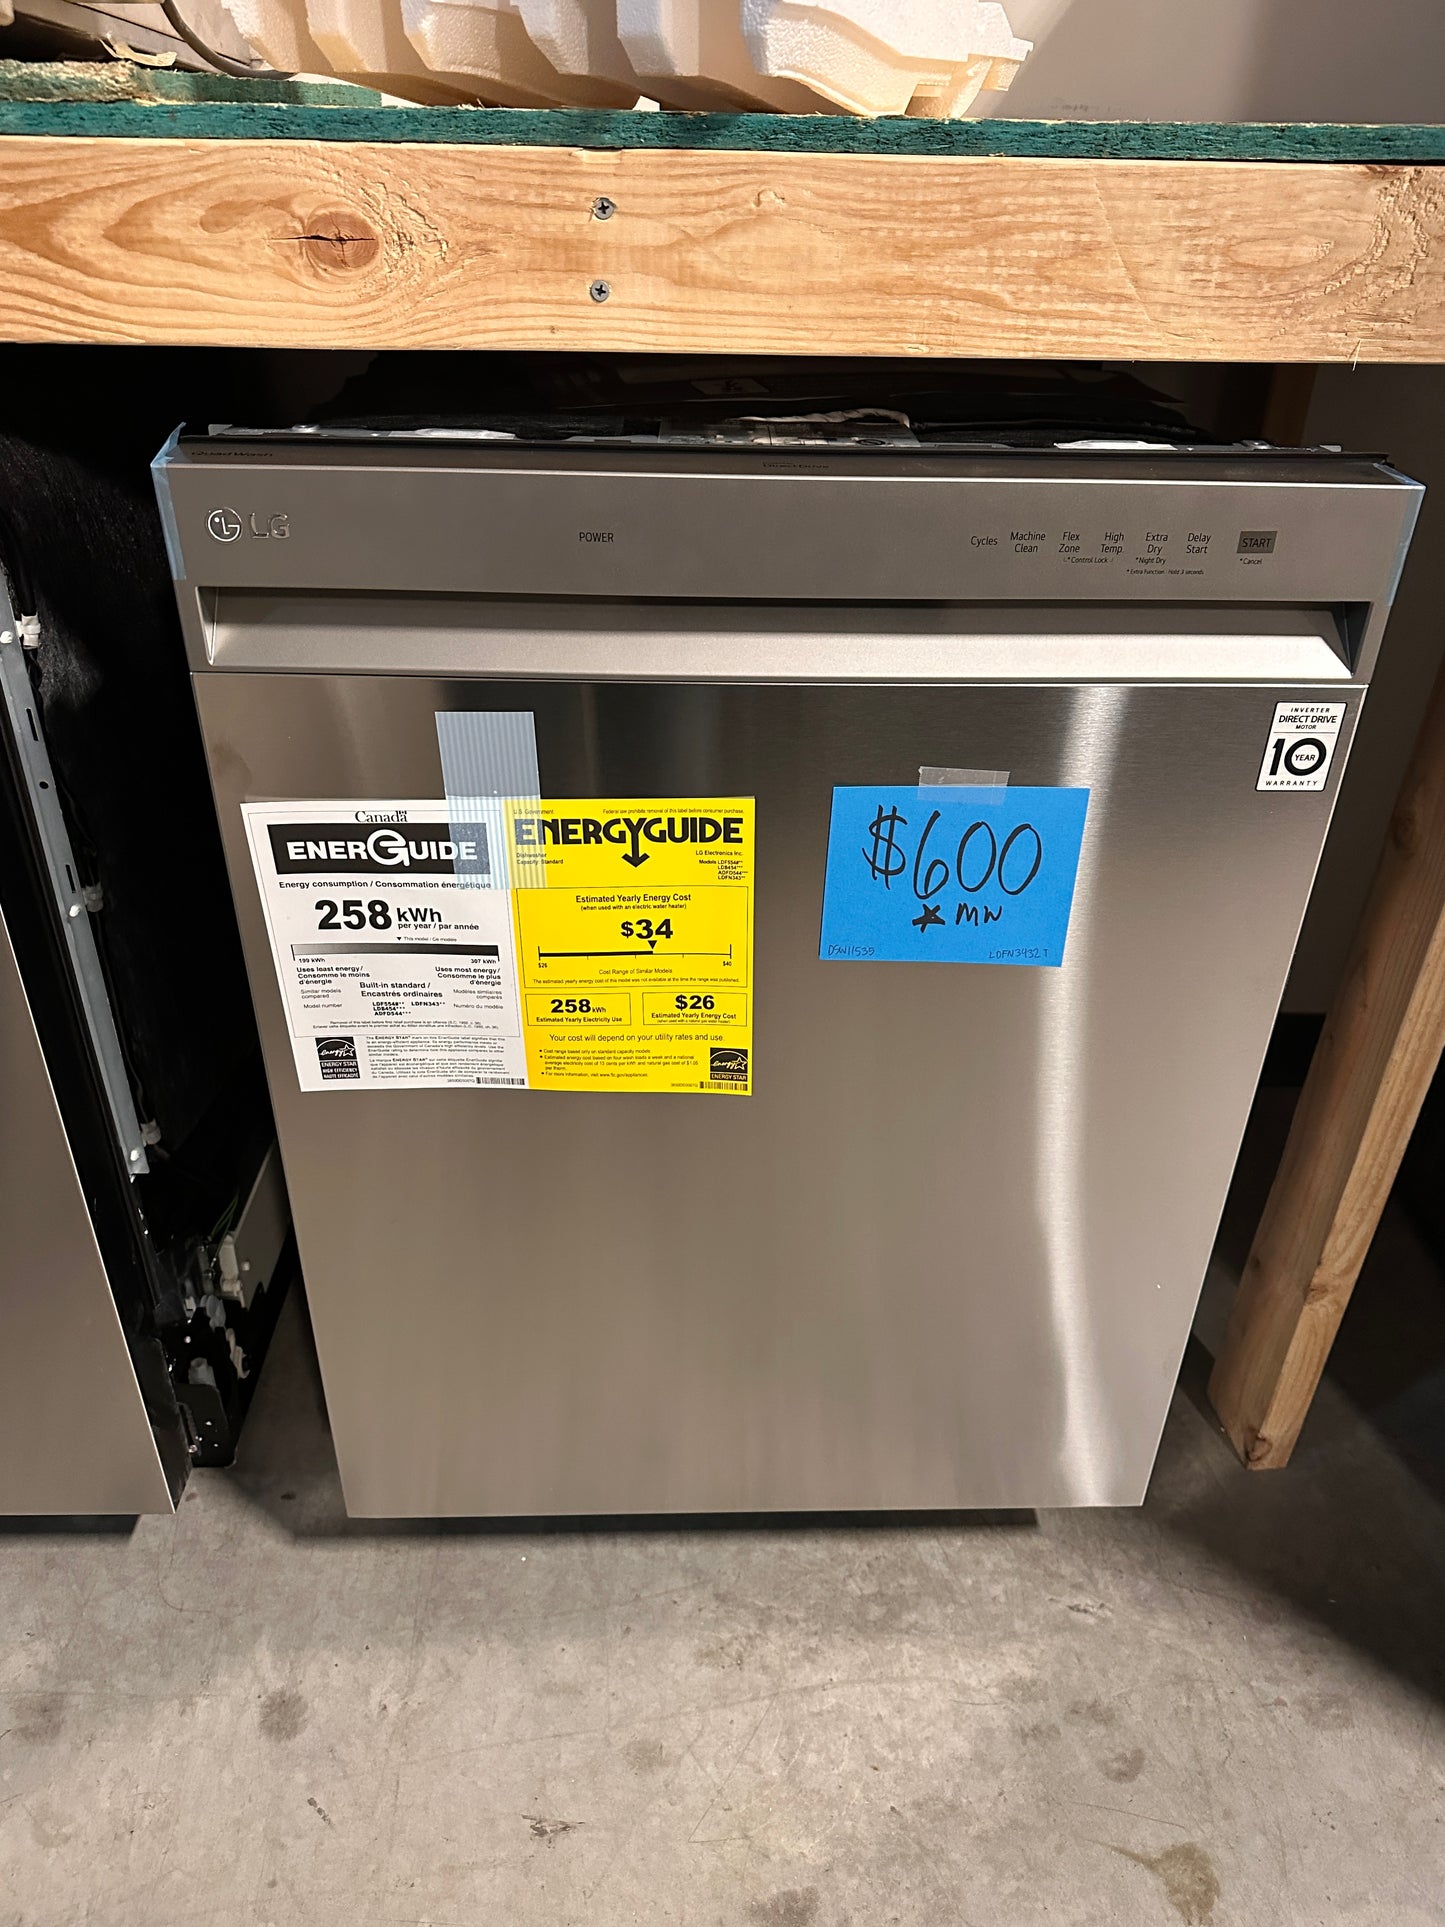 GREAT NEW LG STAINLESS STEEL TUB DISHWASHER - DSW11535